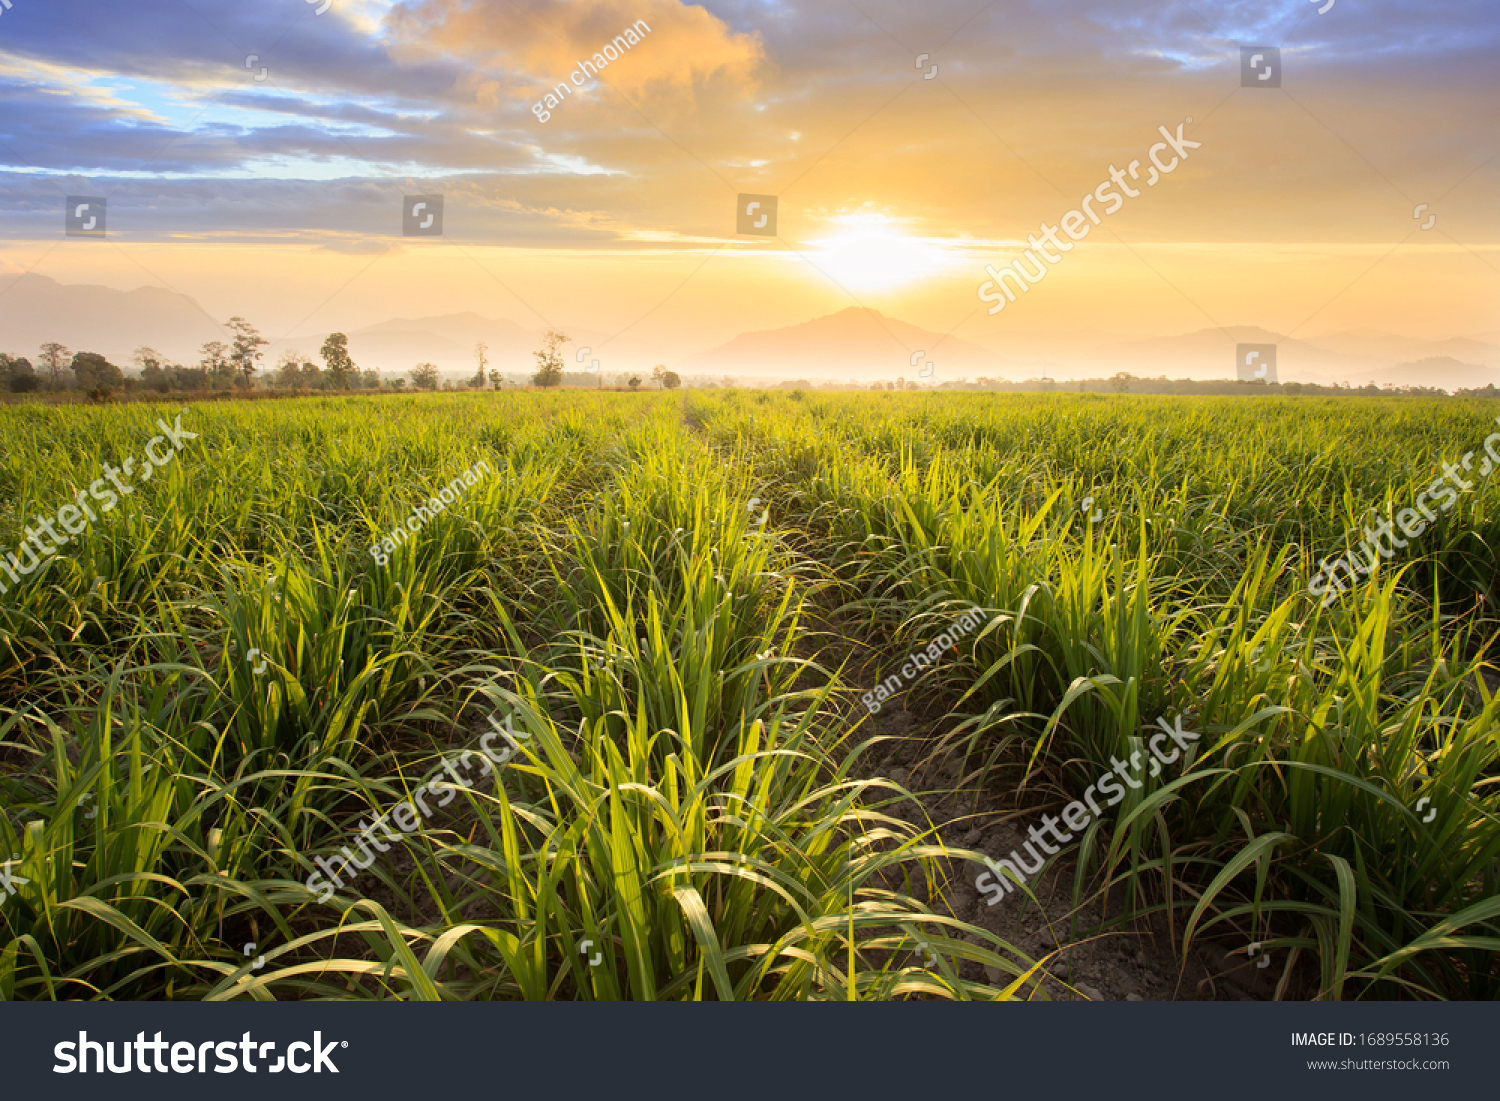 Sugarcane field at sunset. sugarcane is a grass of poaceae family. it taste sweet and good for health. Well known as tebu in malaysia #1689558136